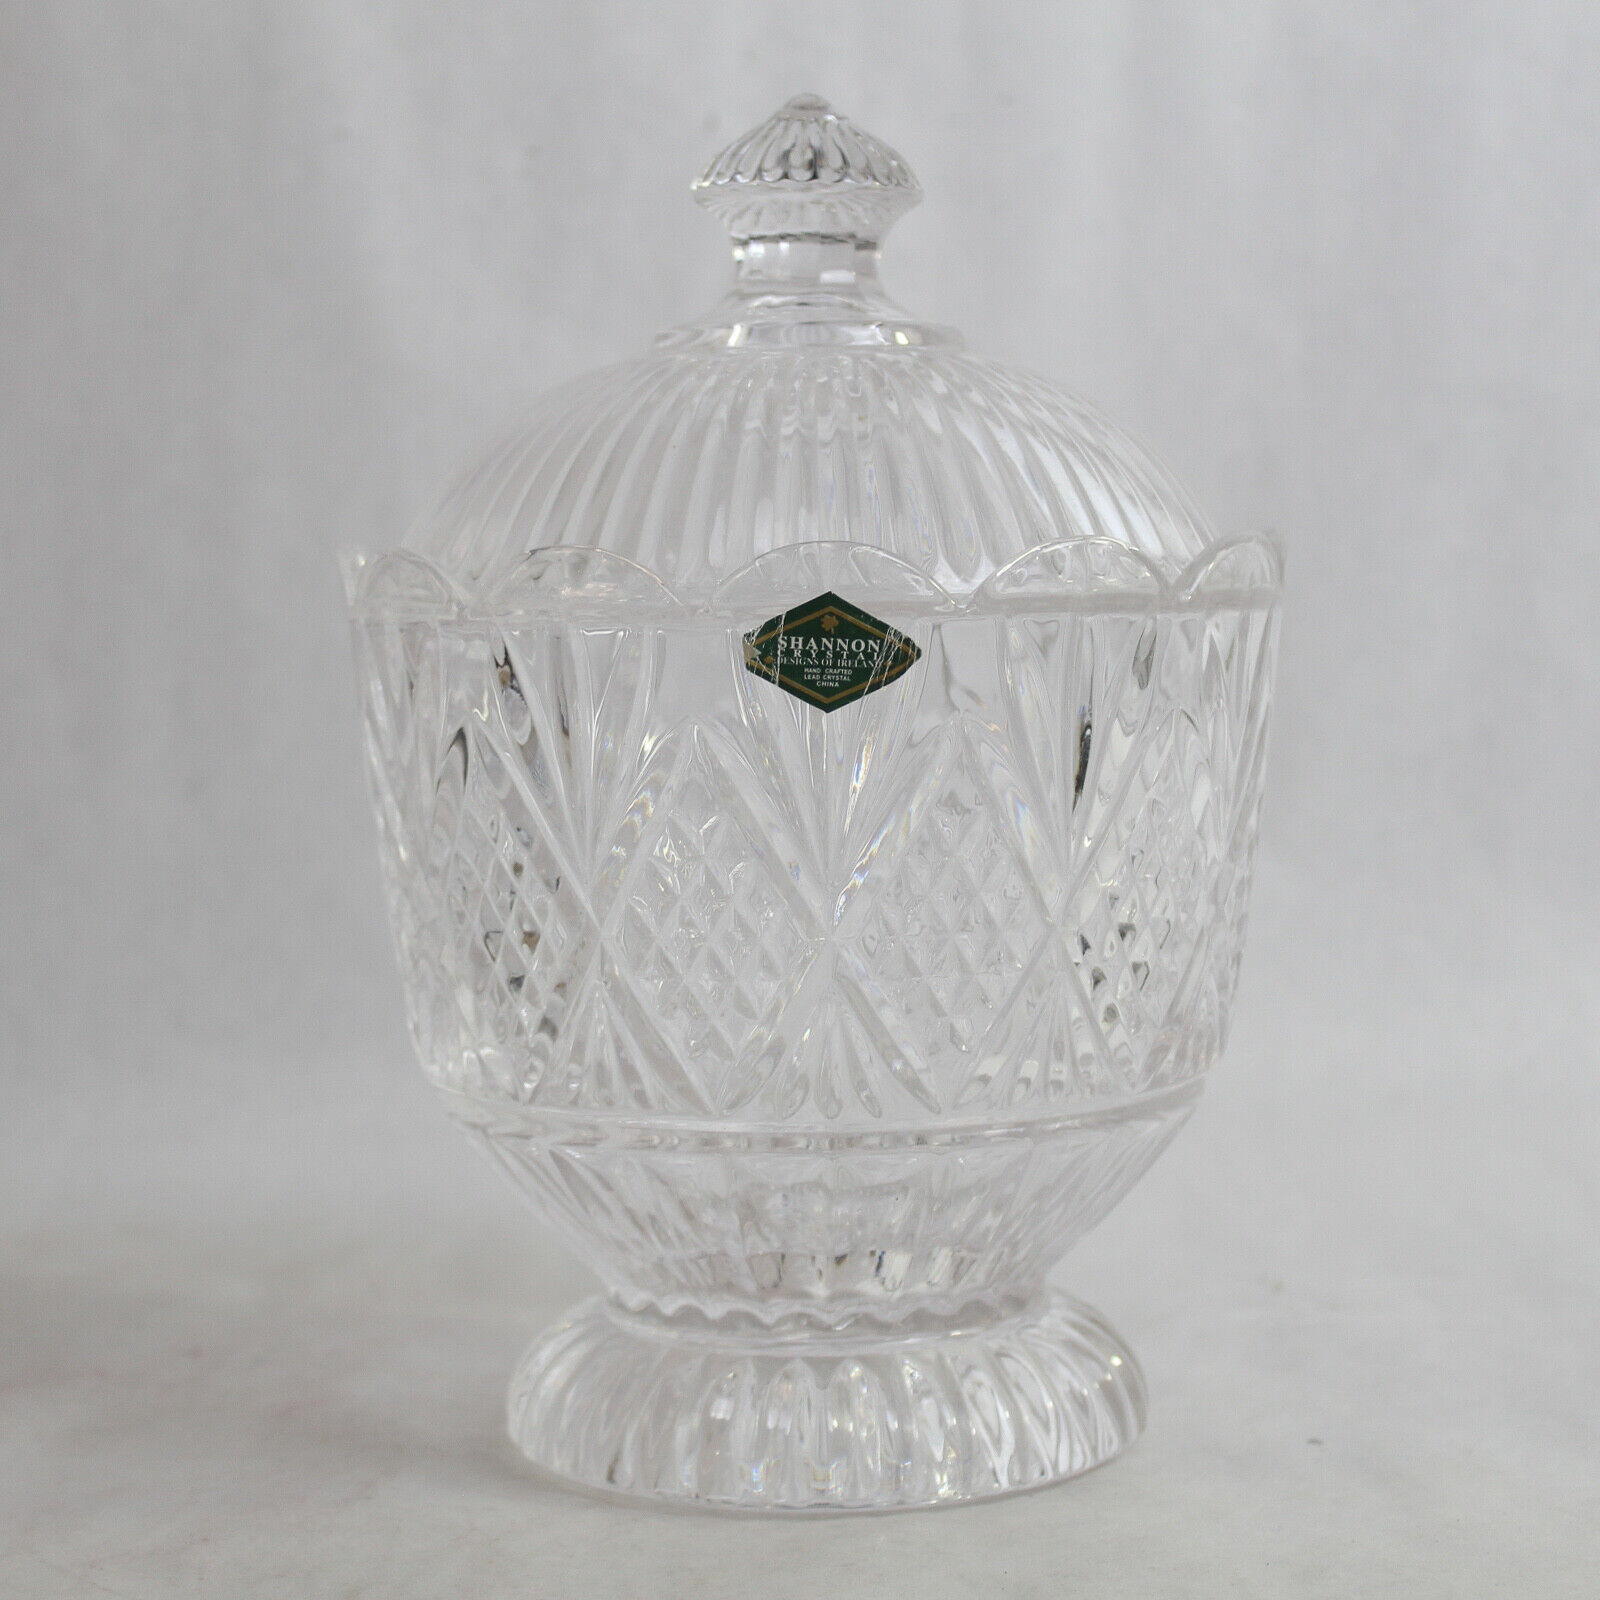 Vintage Shannon Crystal Godinger Dublin Box Footed Covered Candy Dish Decor